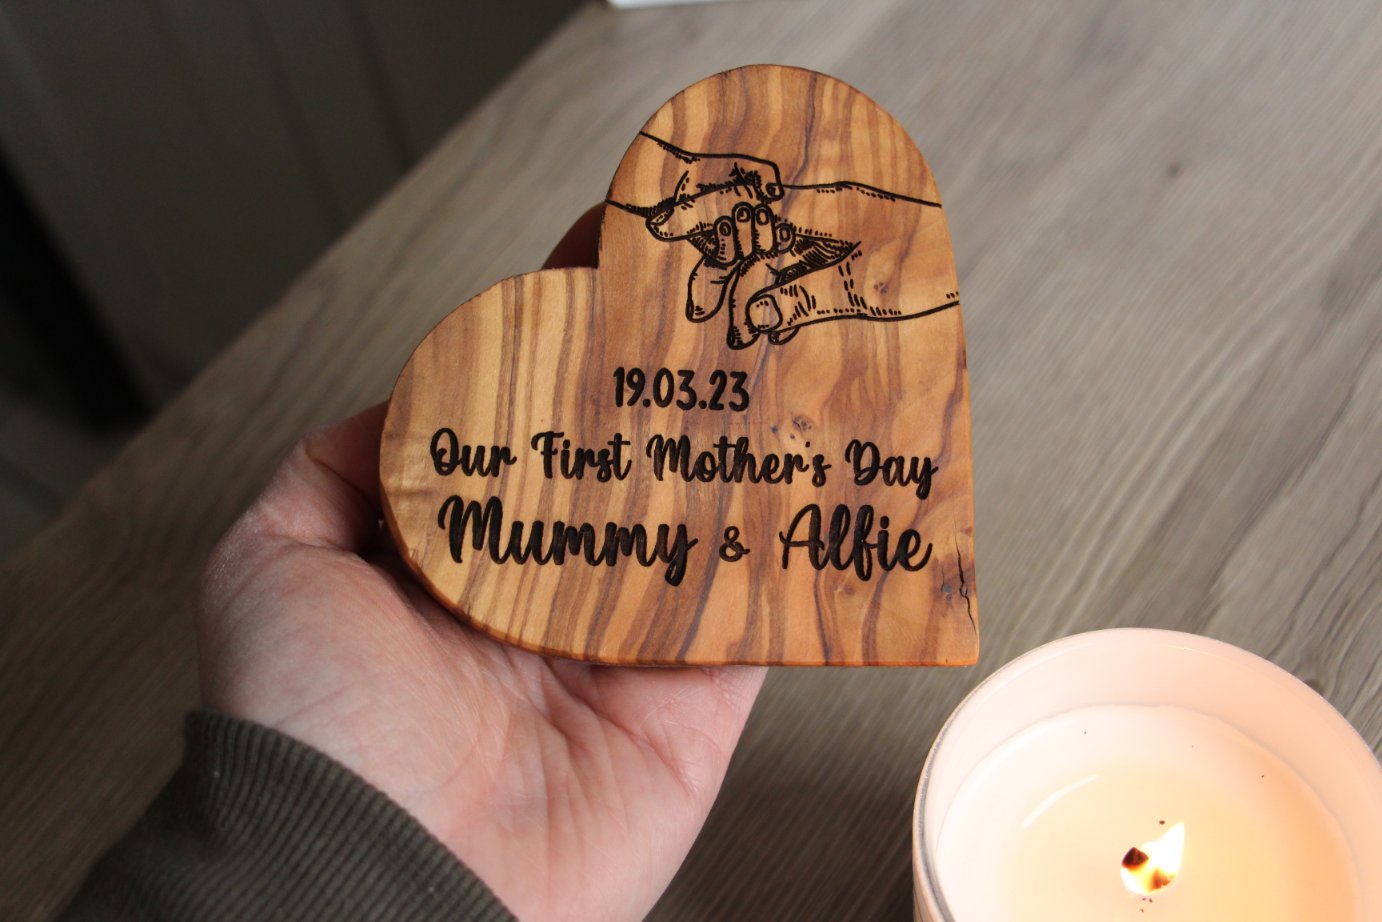 Our First Mothers Day Olive Wood Heart